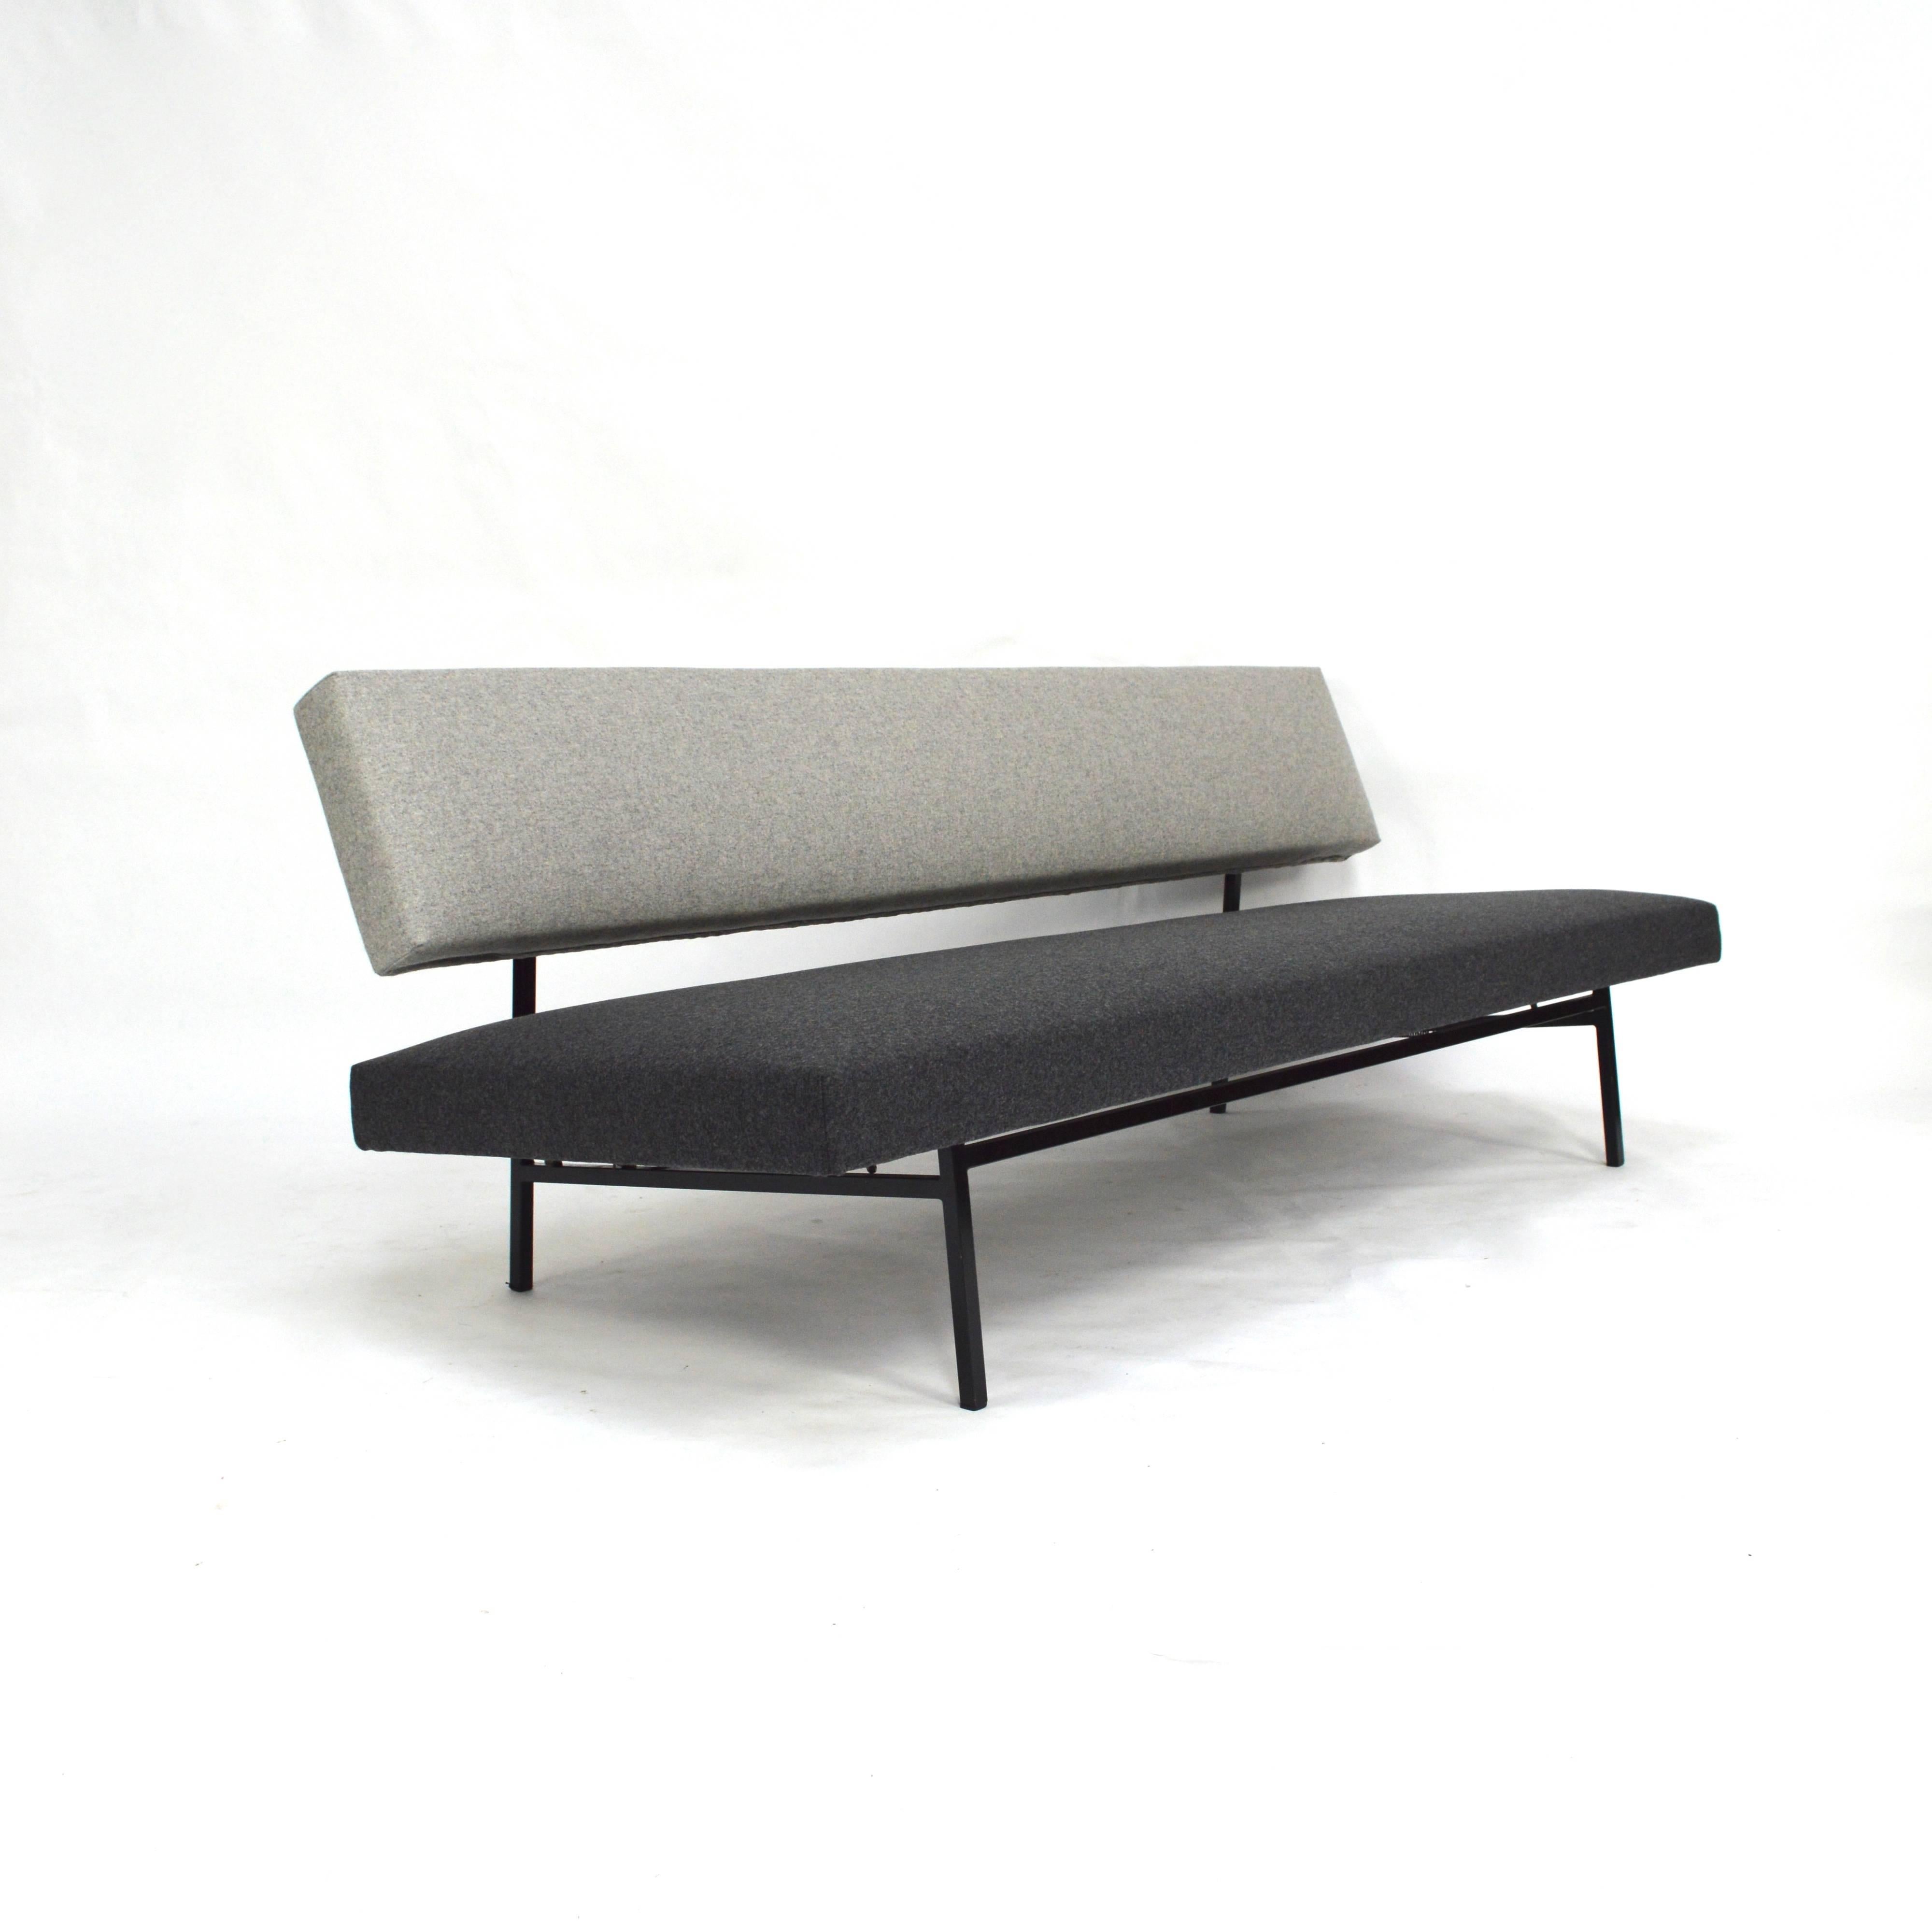 Minimalistic design sofa by Rob Parry for Gelderland. Reupholstered with trendy two-tone felt fabric. The foam interior has also been replaced in both seat and back. The metal base can be professionally re-painted on request.

Parry was a protegé